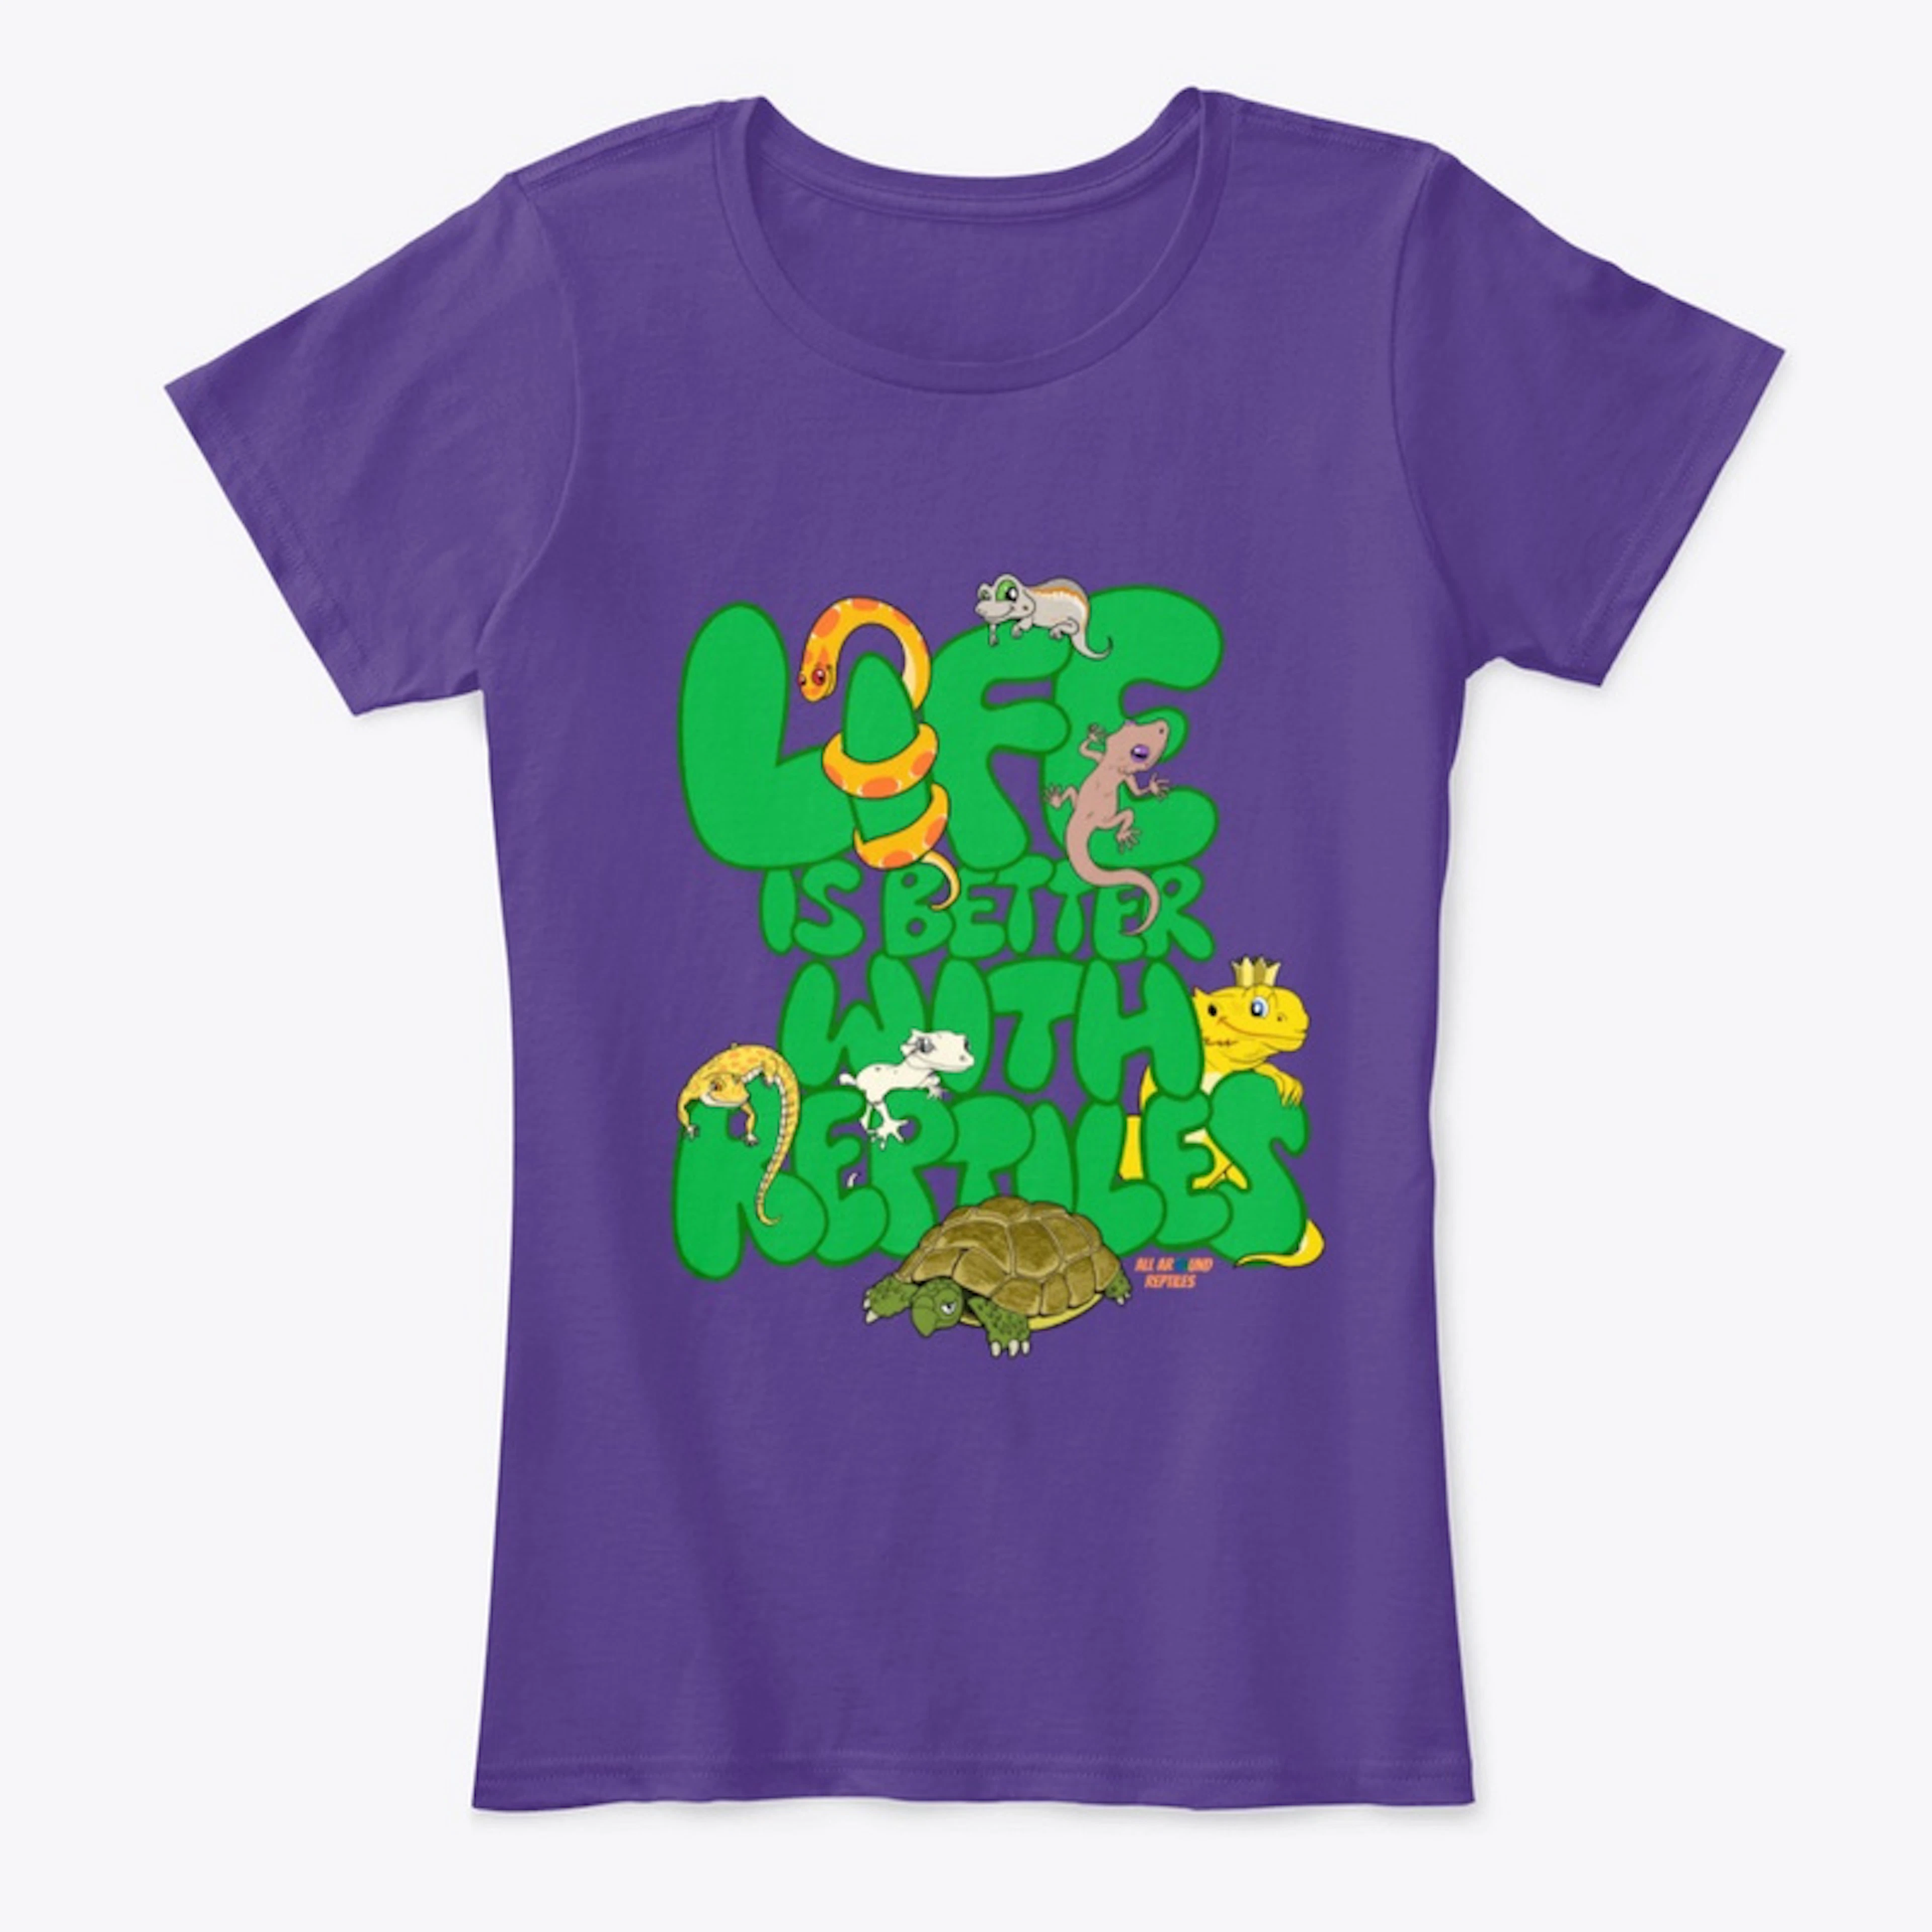 Life is better with reptiles - Tee